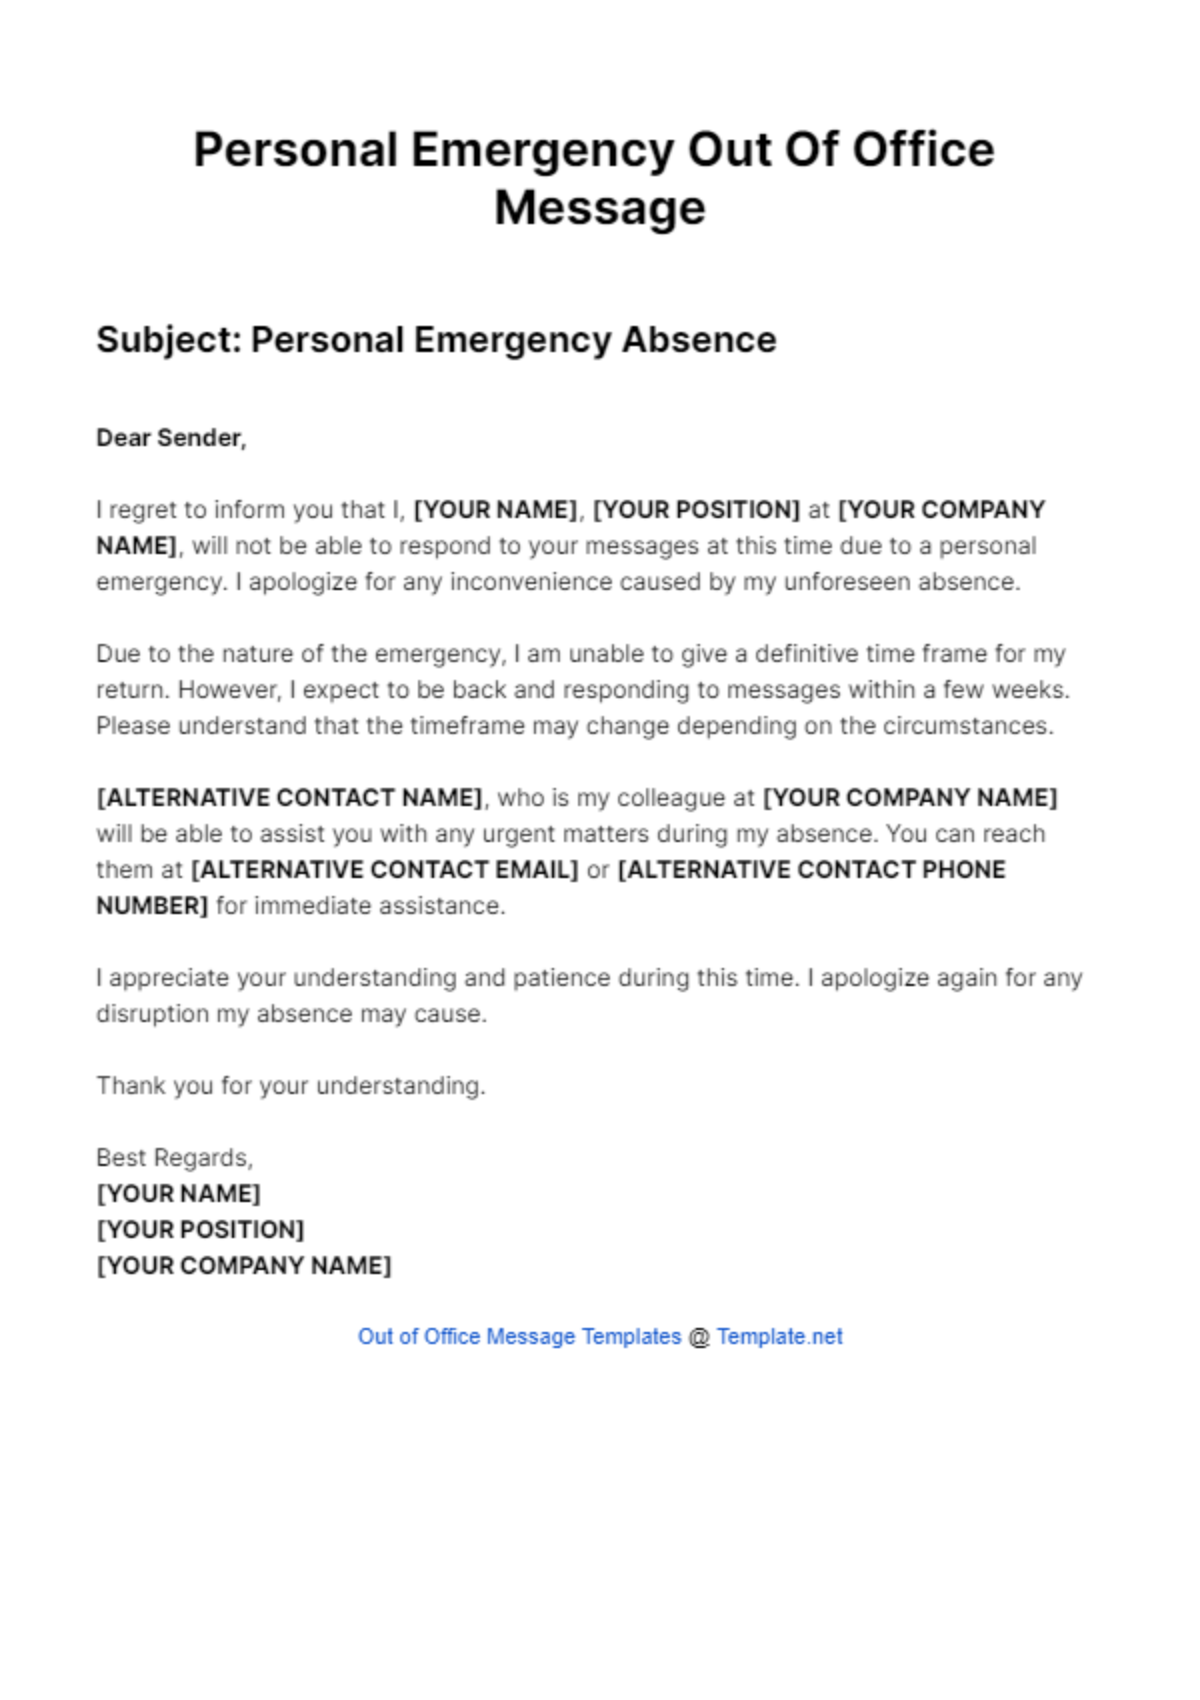 Personal Emergency Out Of Office Message Template